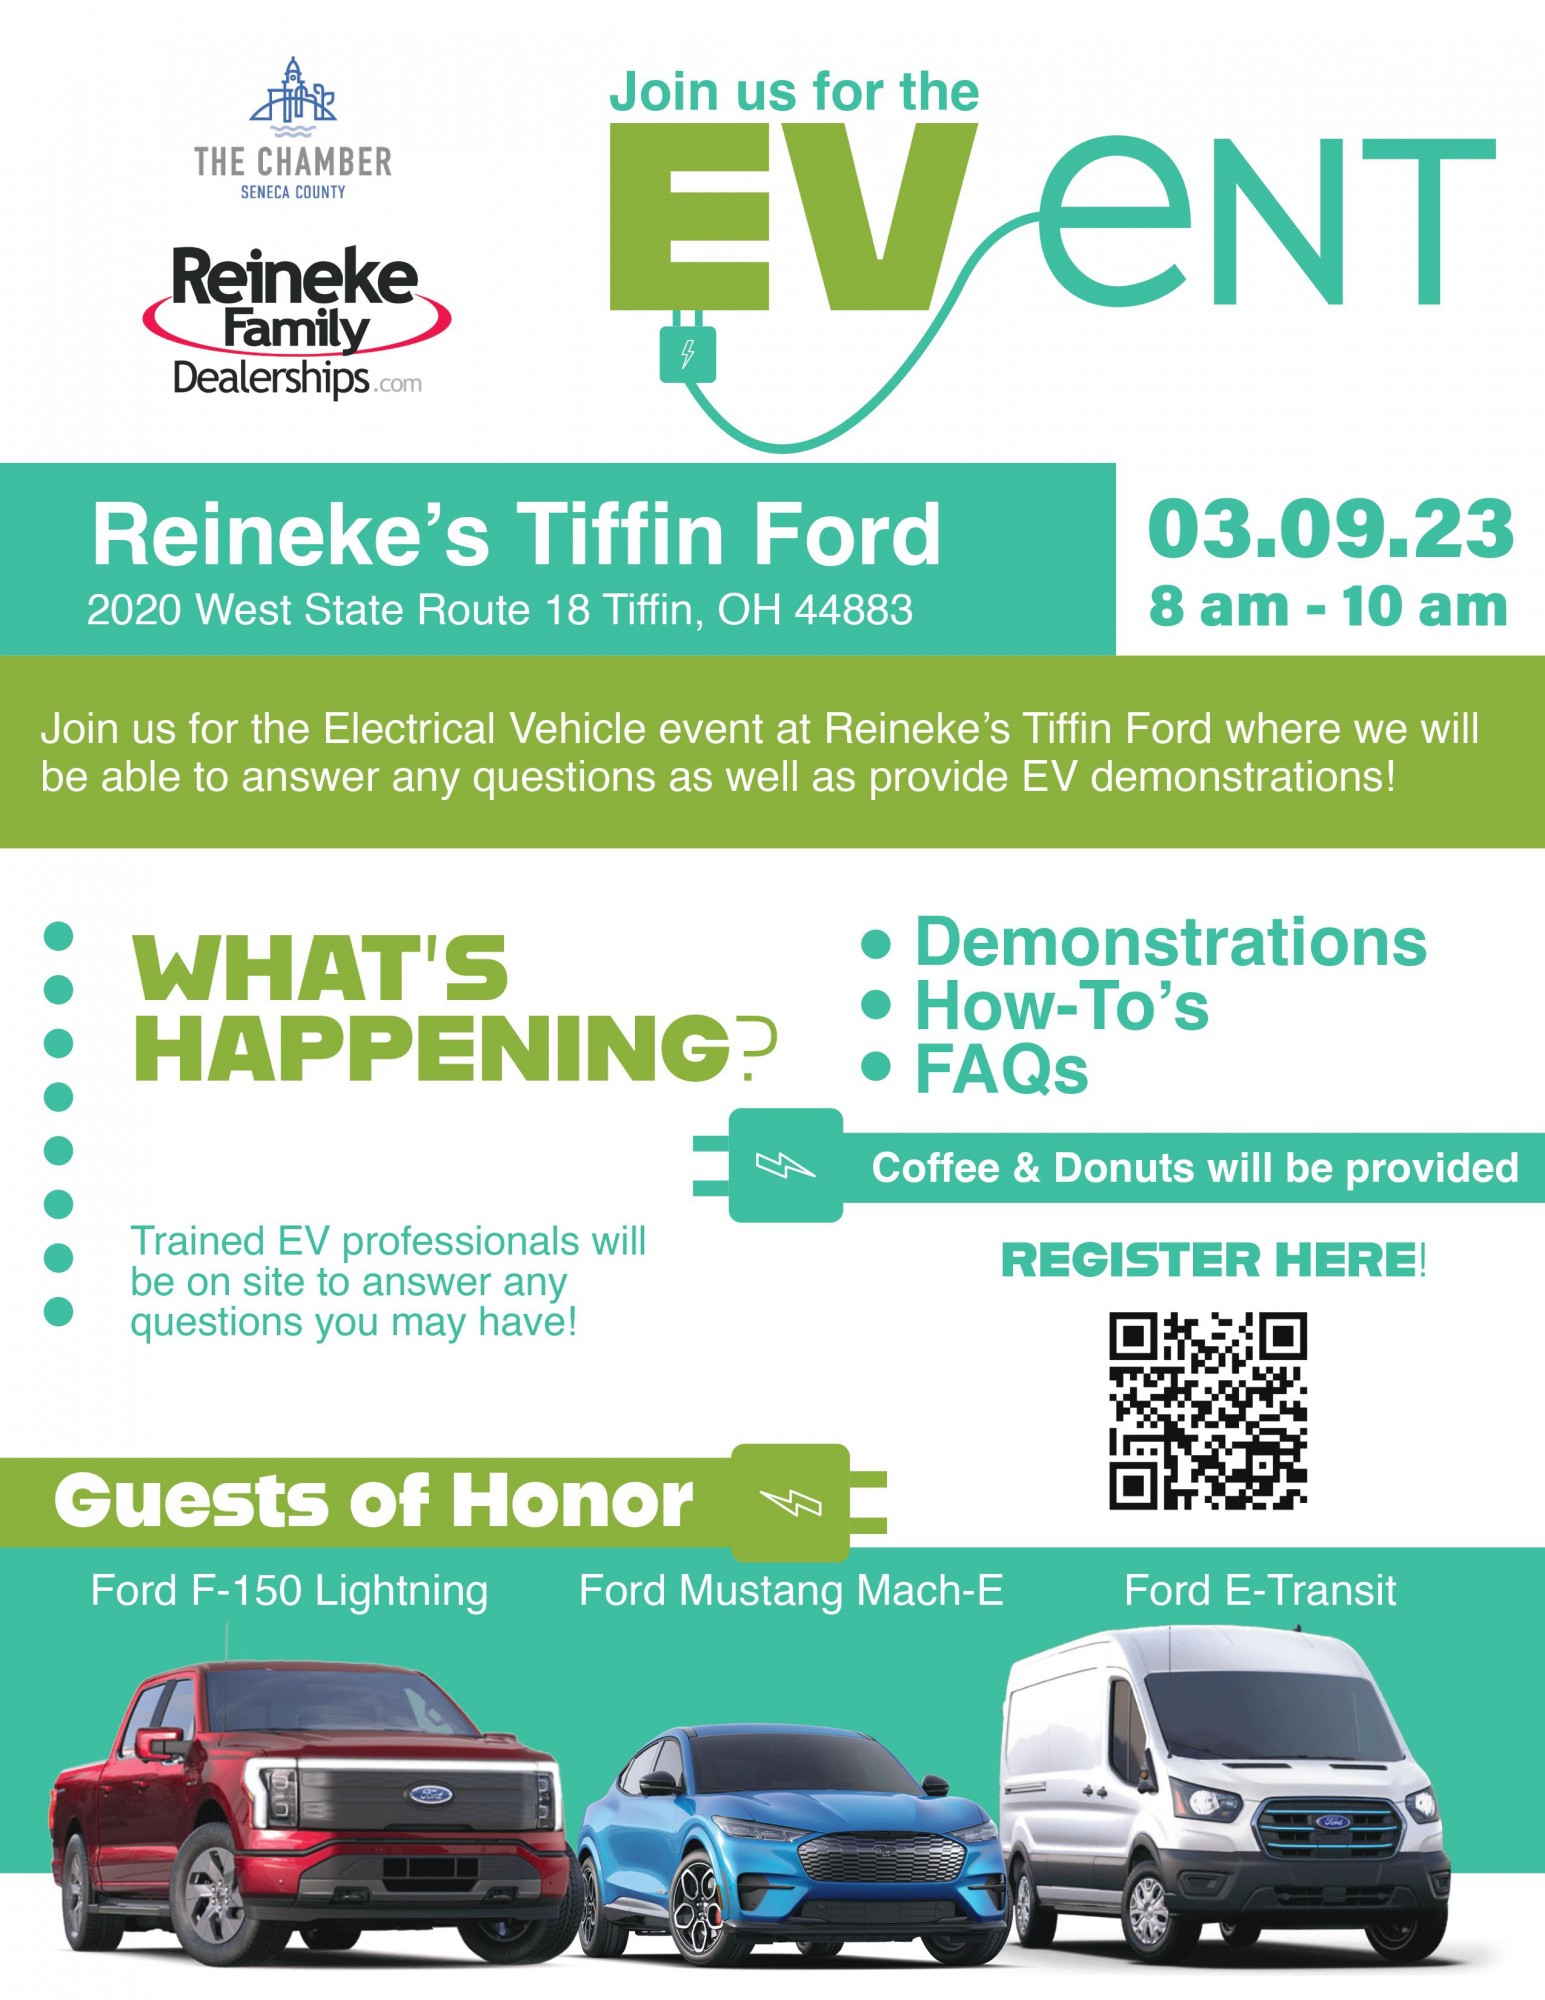  It’s Electric…at Reineke’s Tiffin Ford Lincoln